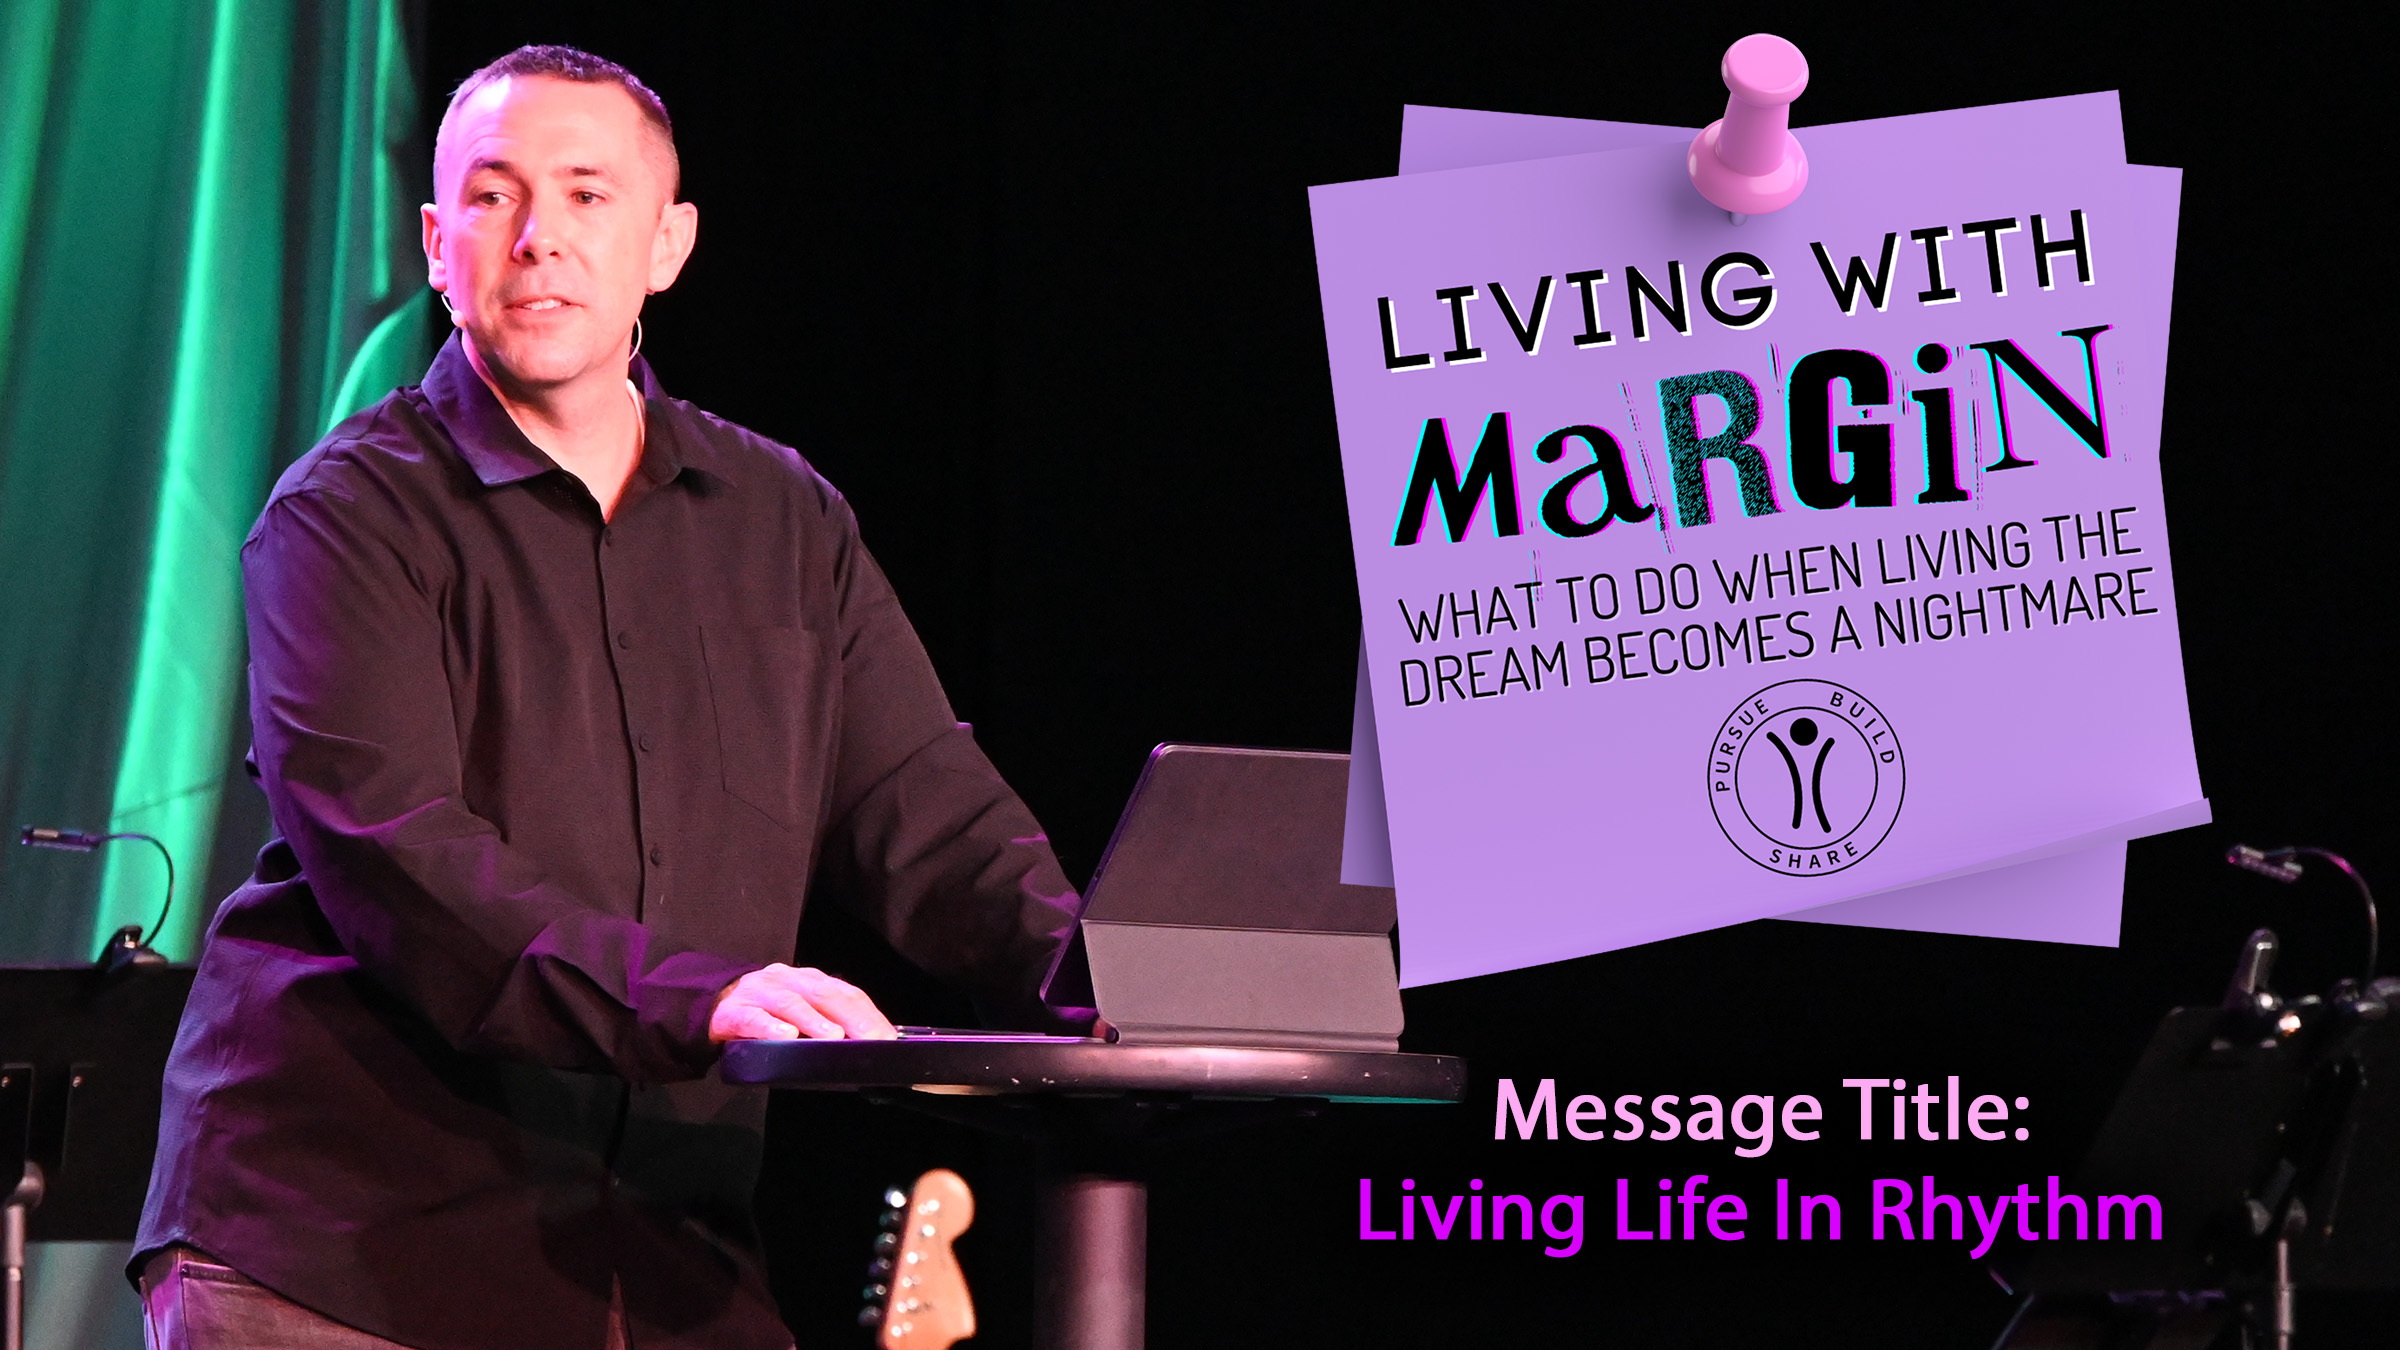 Living With Margin - Living Life in Rhythm